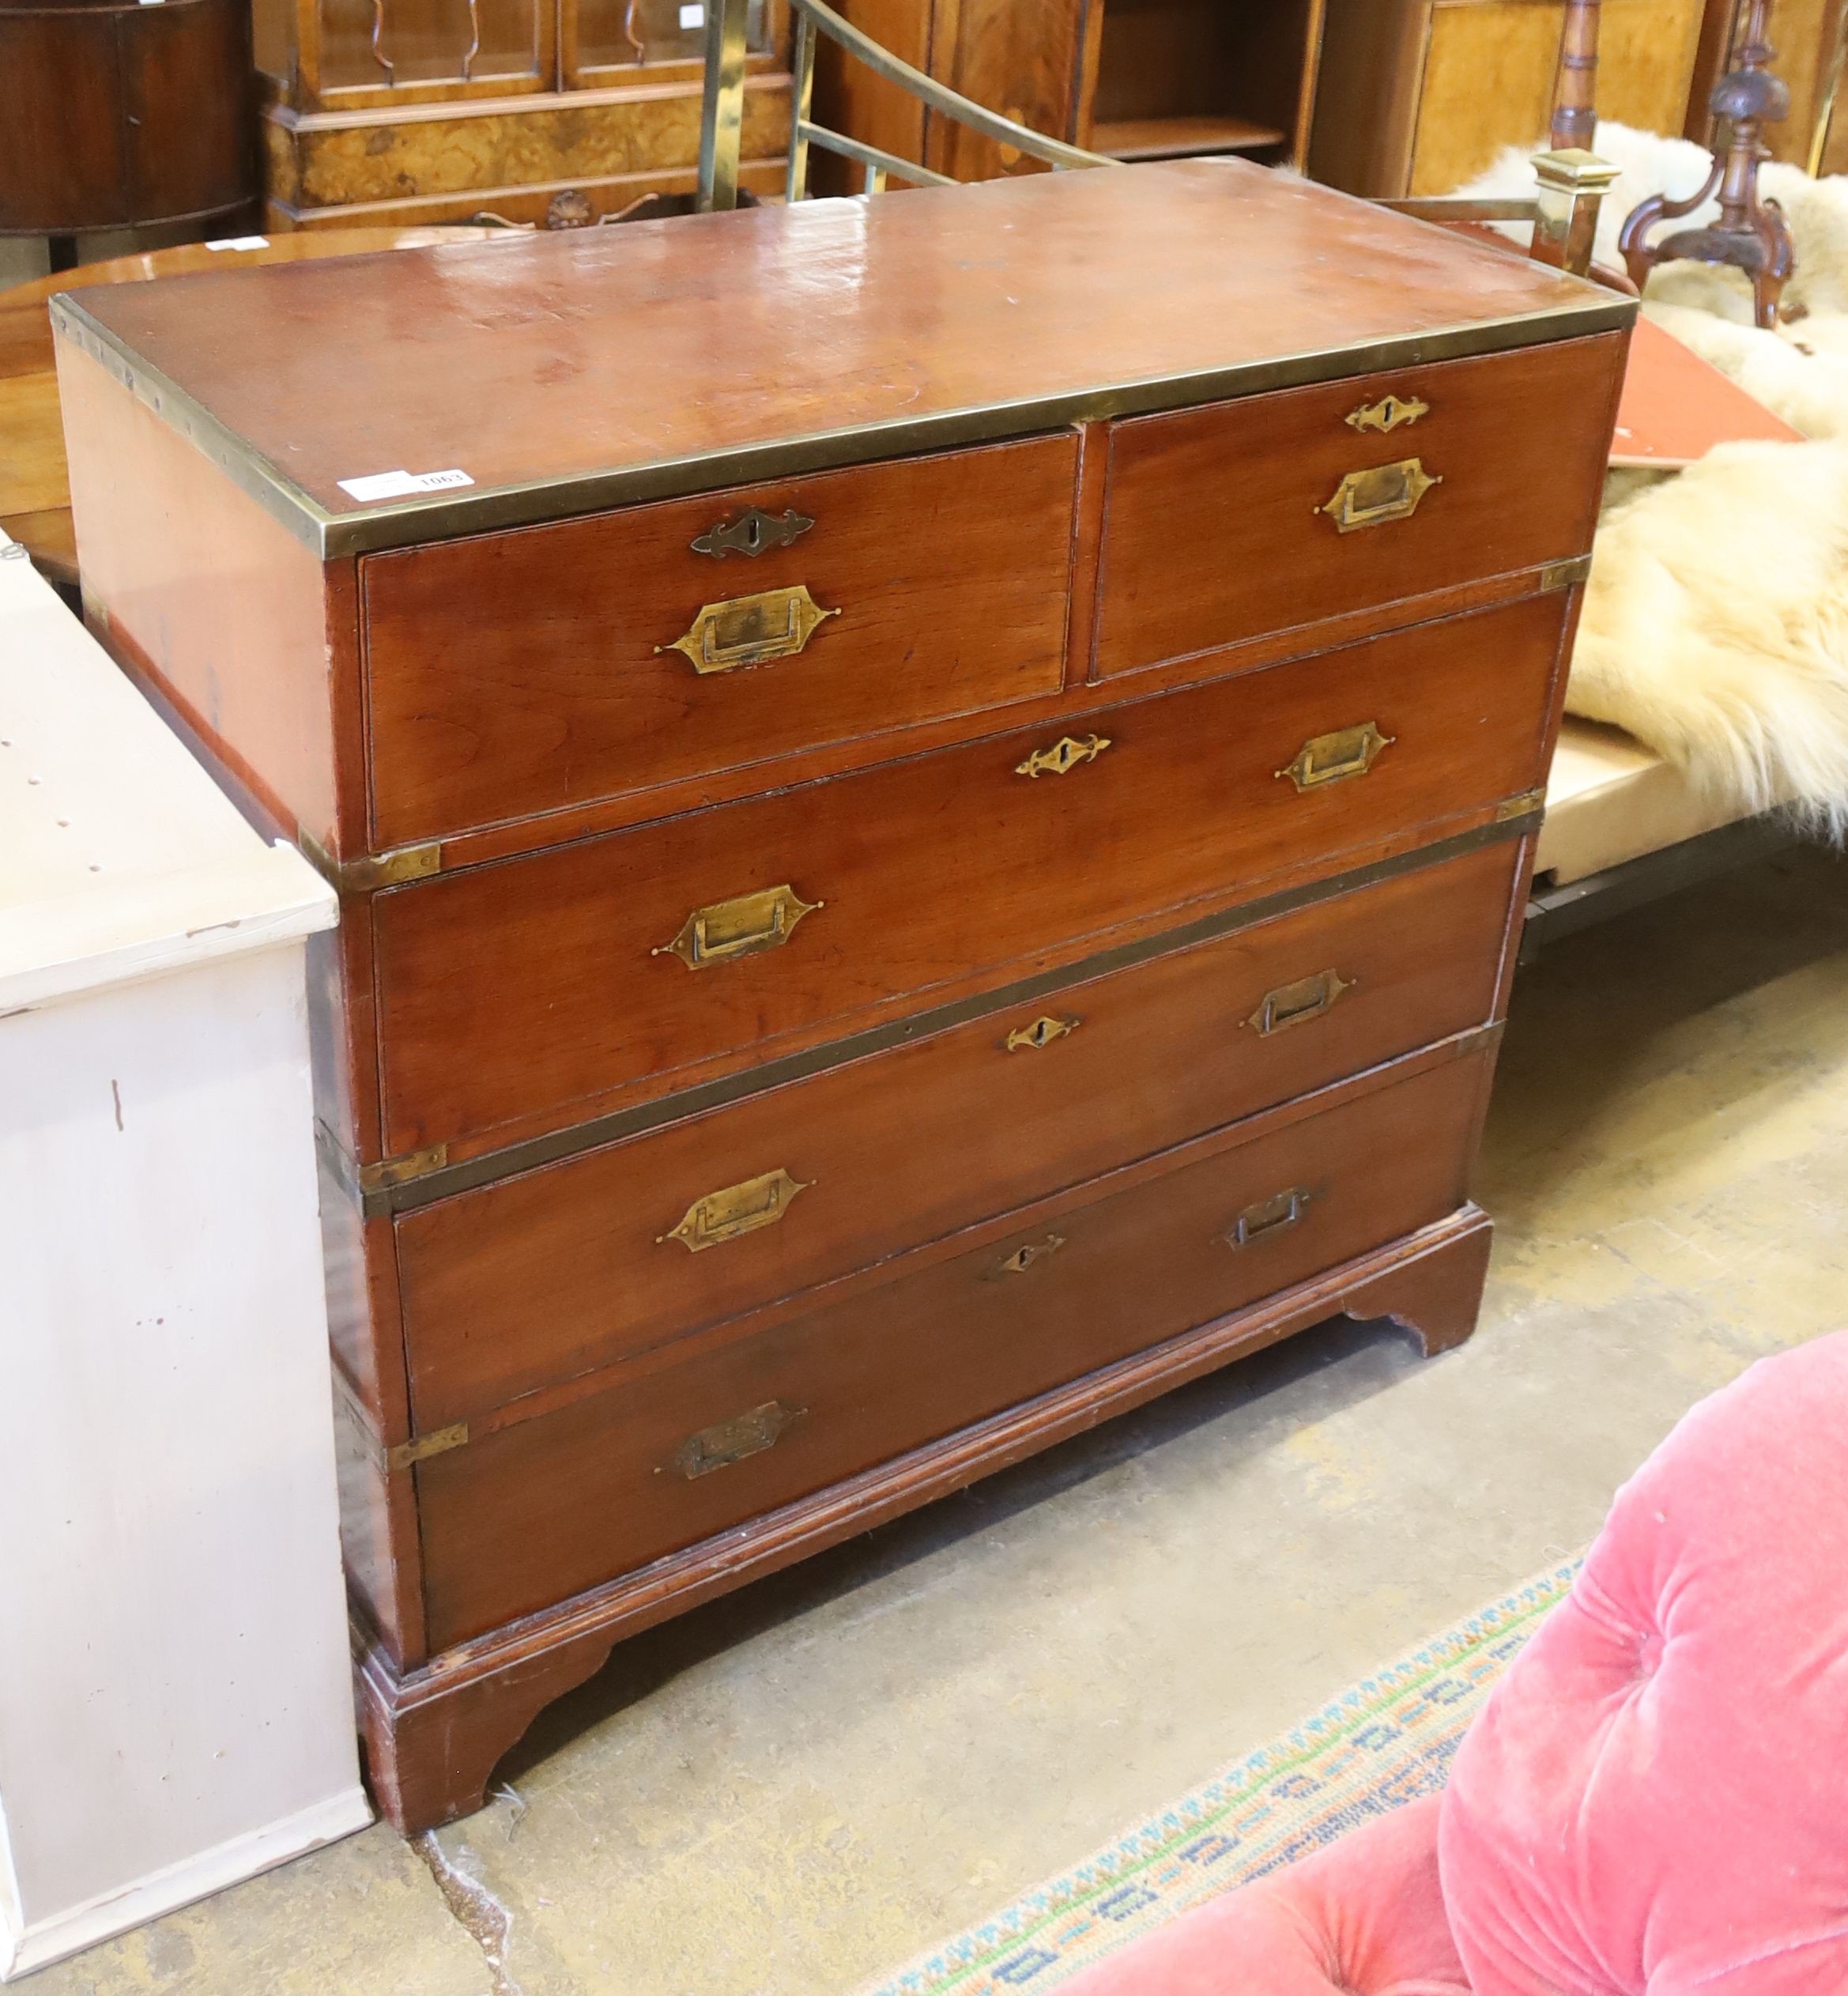 A Victorian brass mounted mahogany campaign chest of drawers, width 106cm, depth 40cm, height 102cm